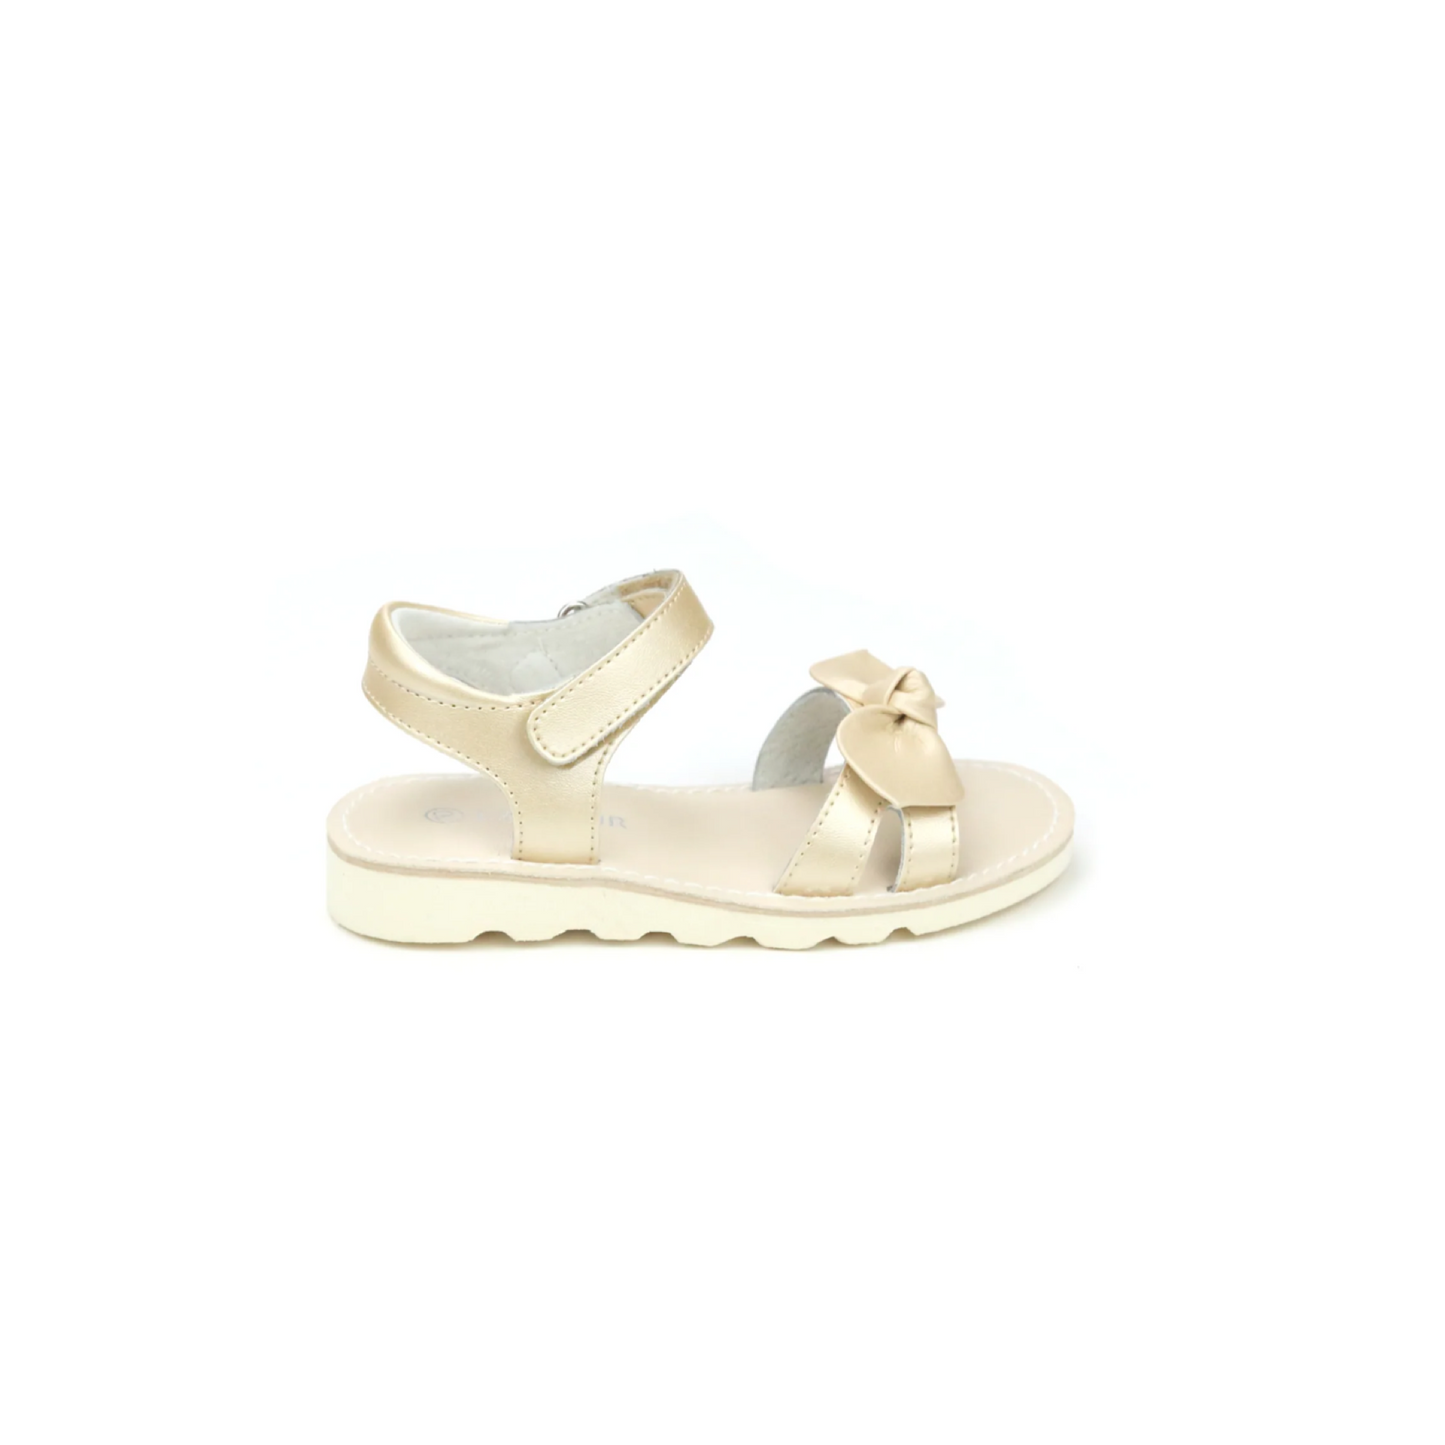 Leigh Bow Toddler Girls Sandal - Champagne